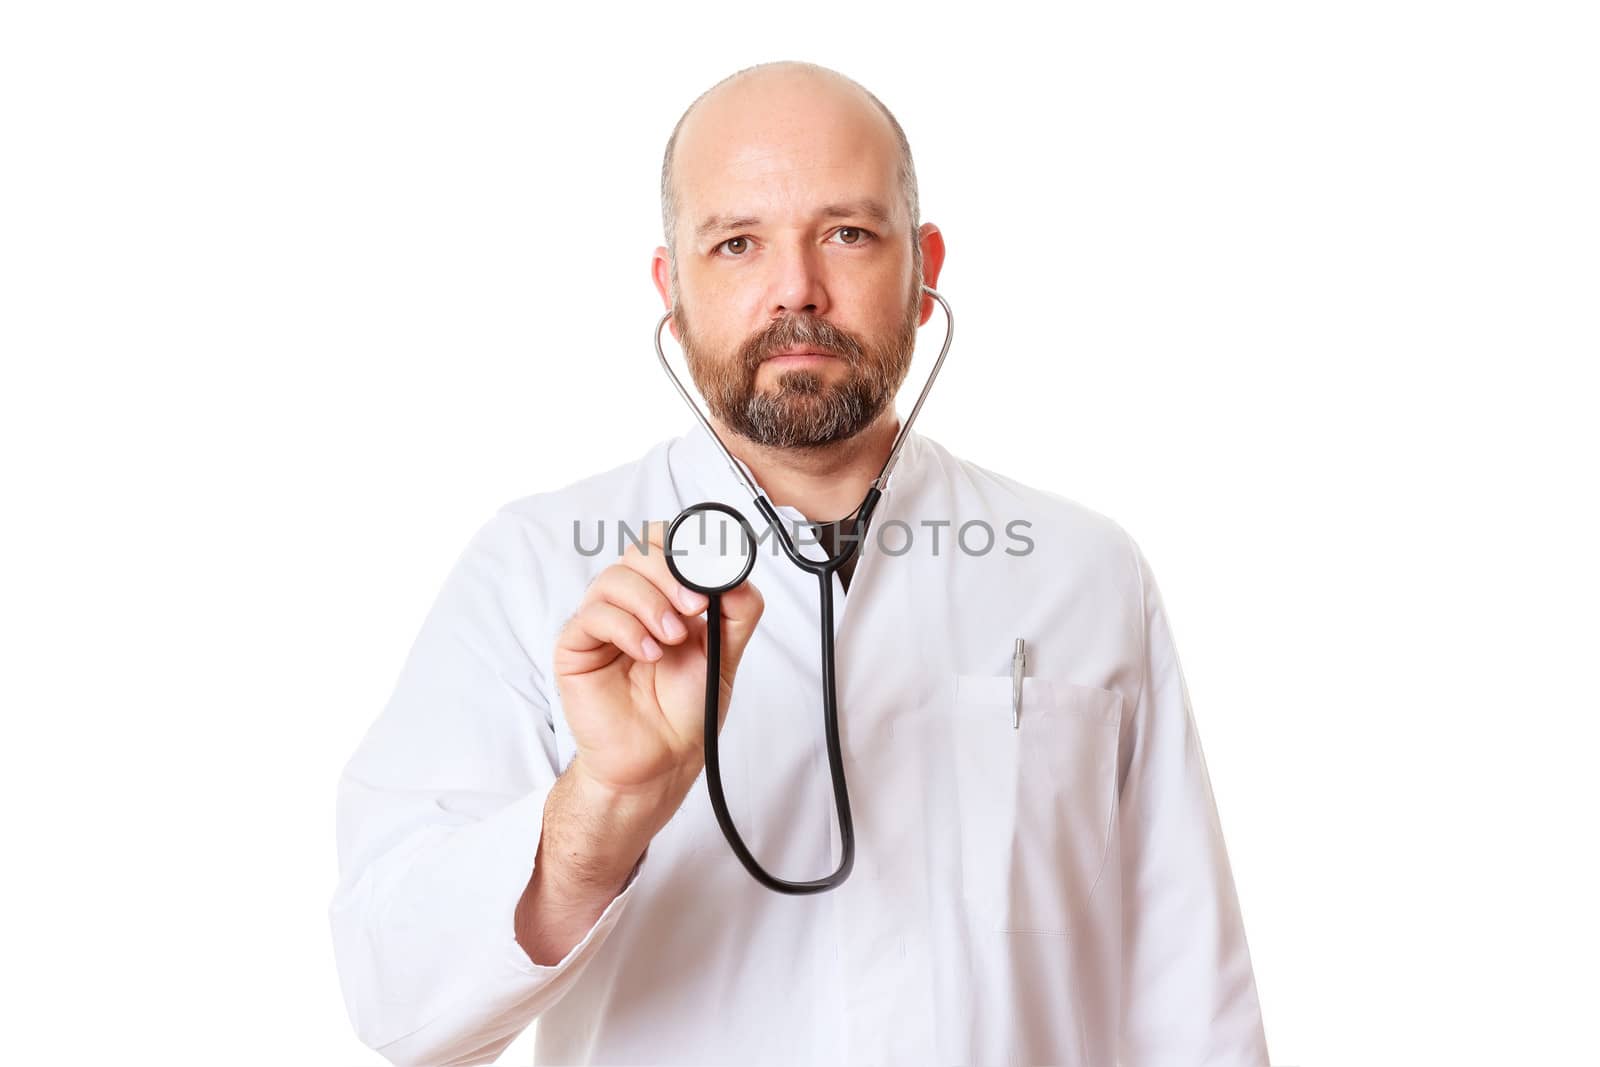 An image of a doctor with a stethoscope isolated on white